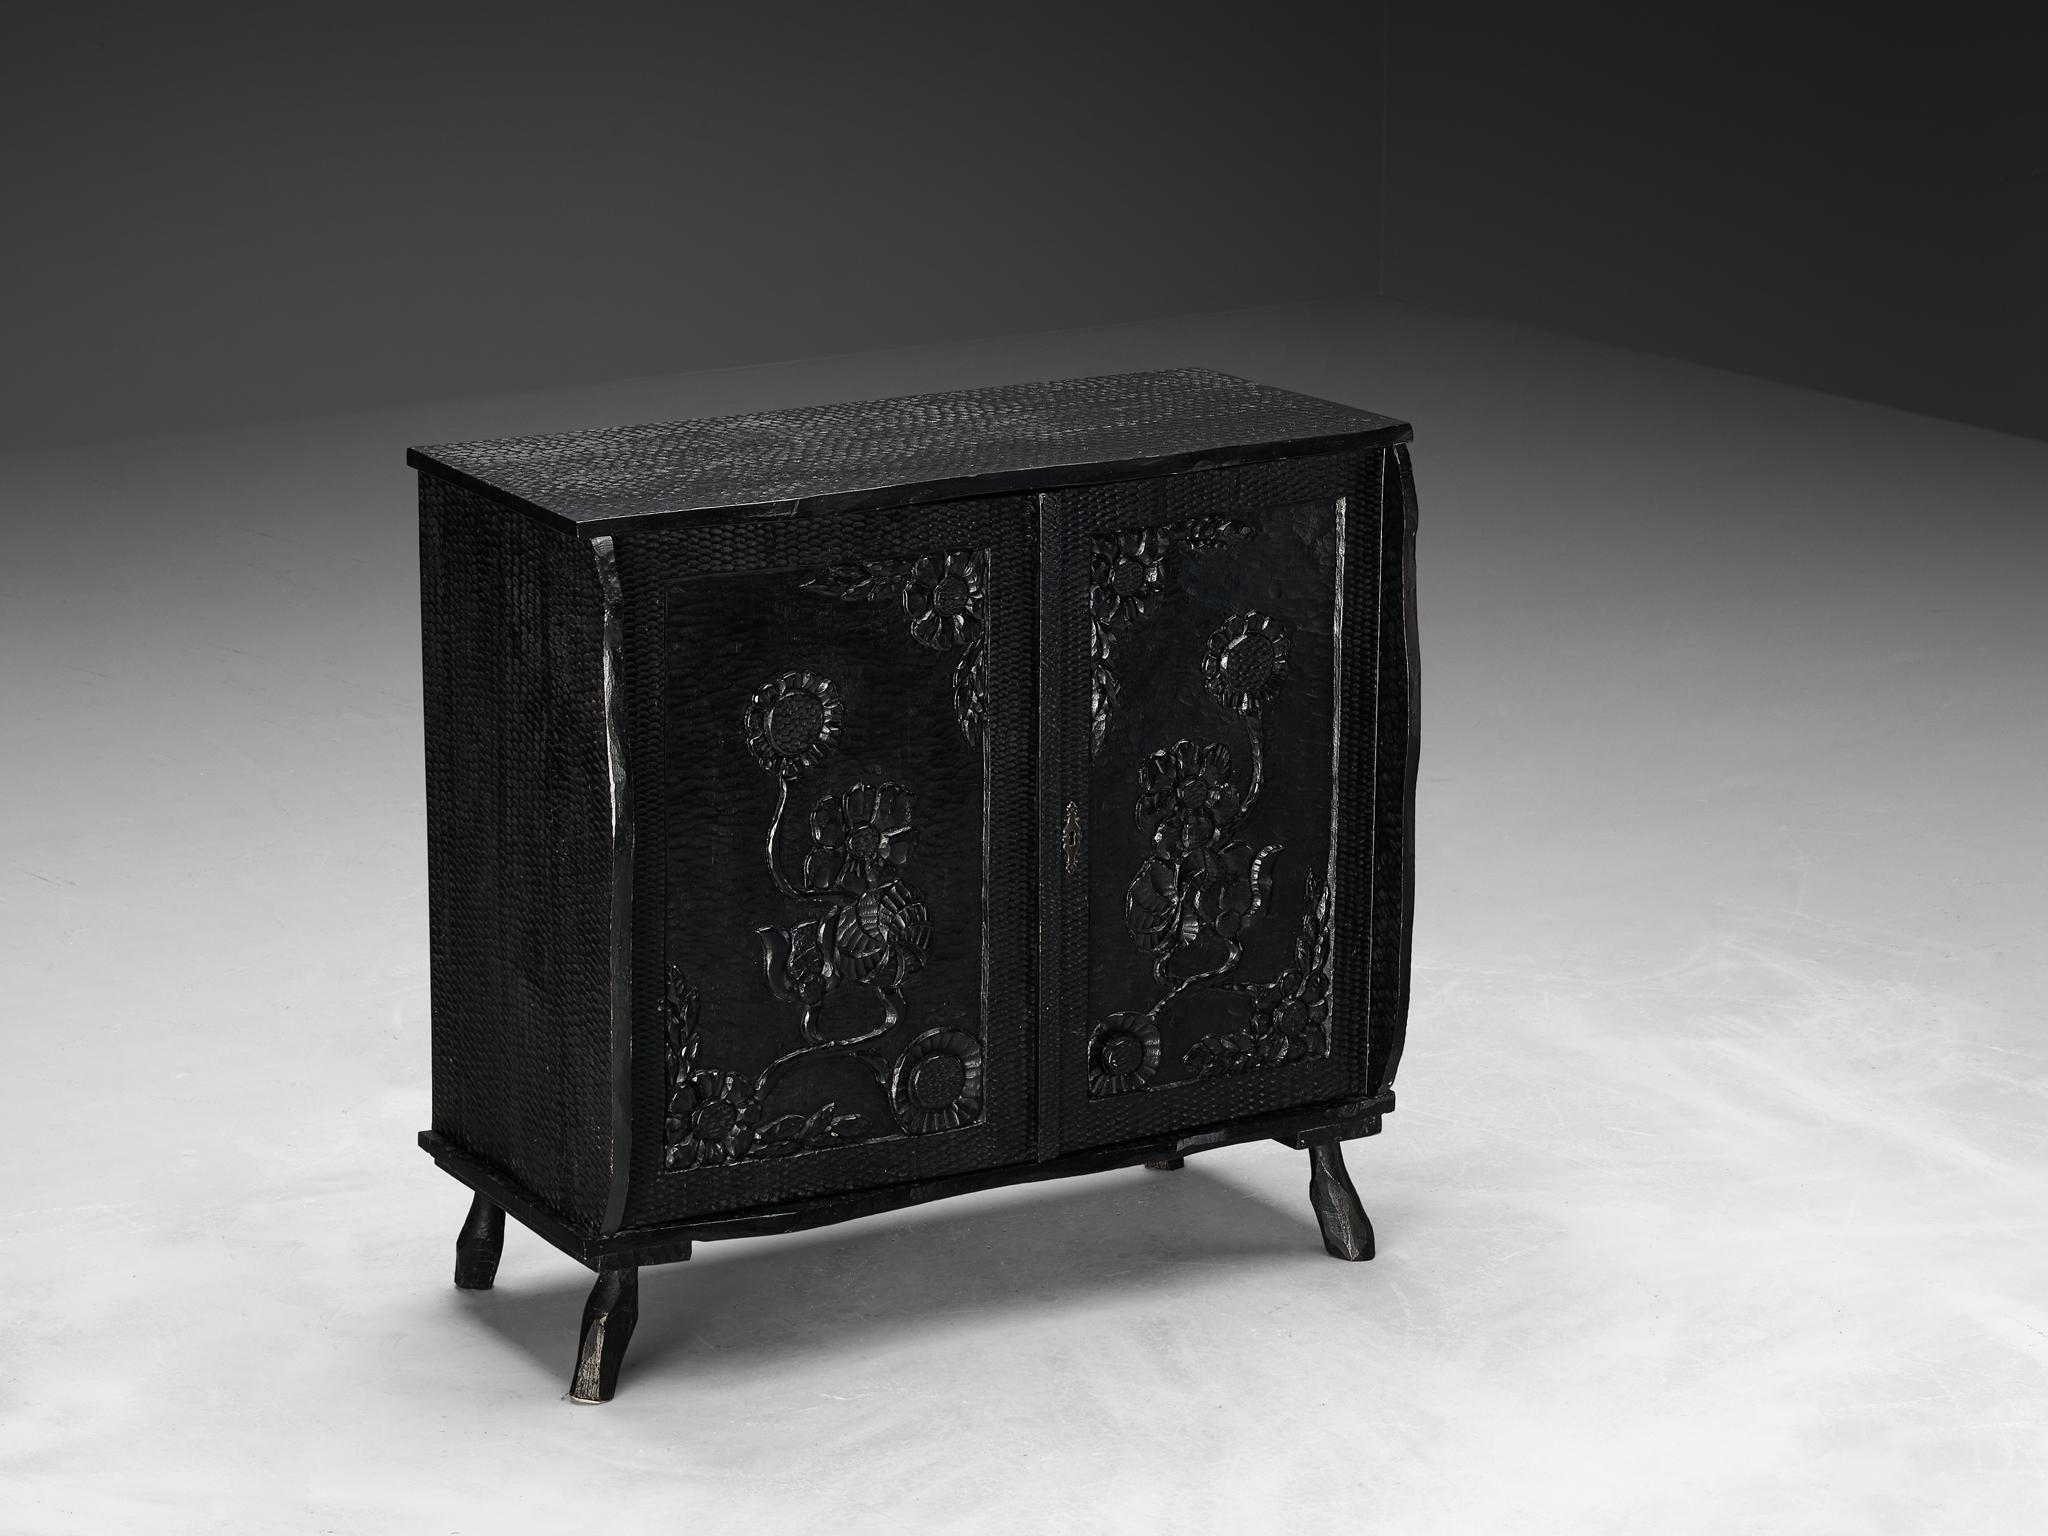 Cabinet, lacquered wood, France, 1970s

Crafted with unparalleled artistry, this large cabinet epitomizes exquisite craftsmanship with meticulously carved details that draw inspiration from nature. This design exudes an enchanting charm reminiscent